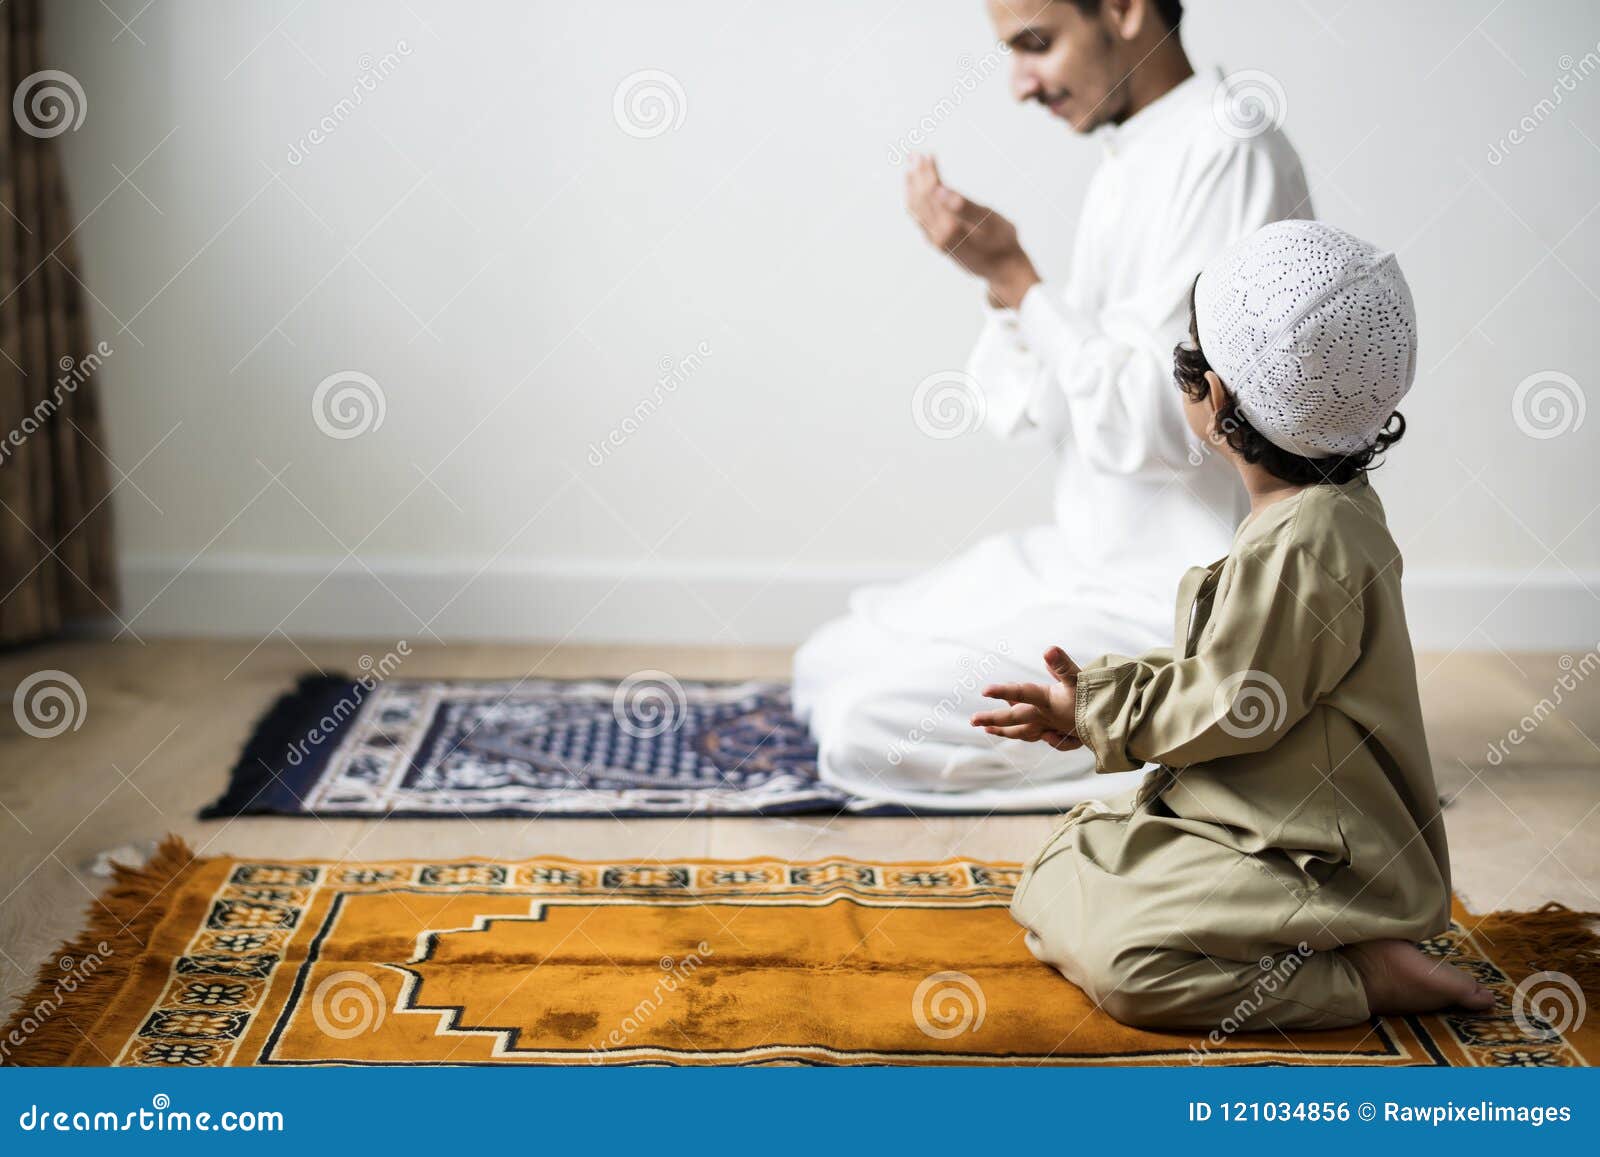 Muslim Boy Learning How To Make Dua To Allah Stock Photo - Image ...